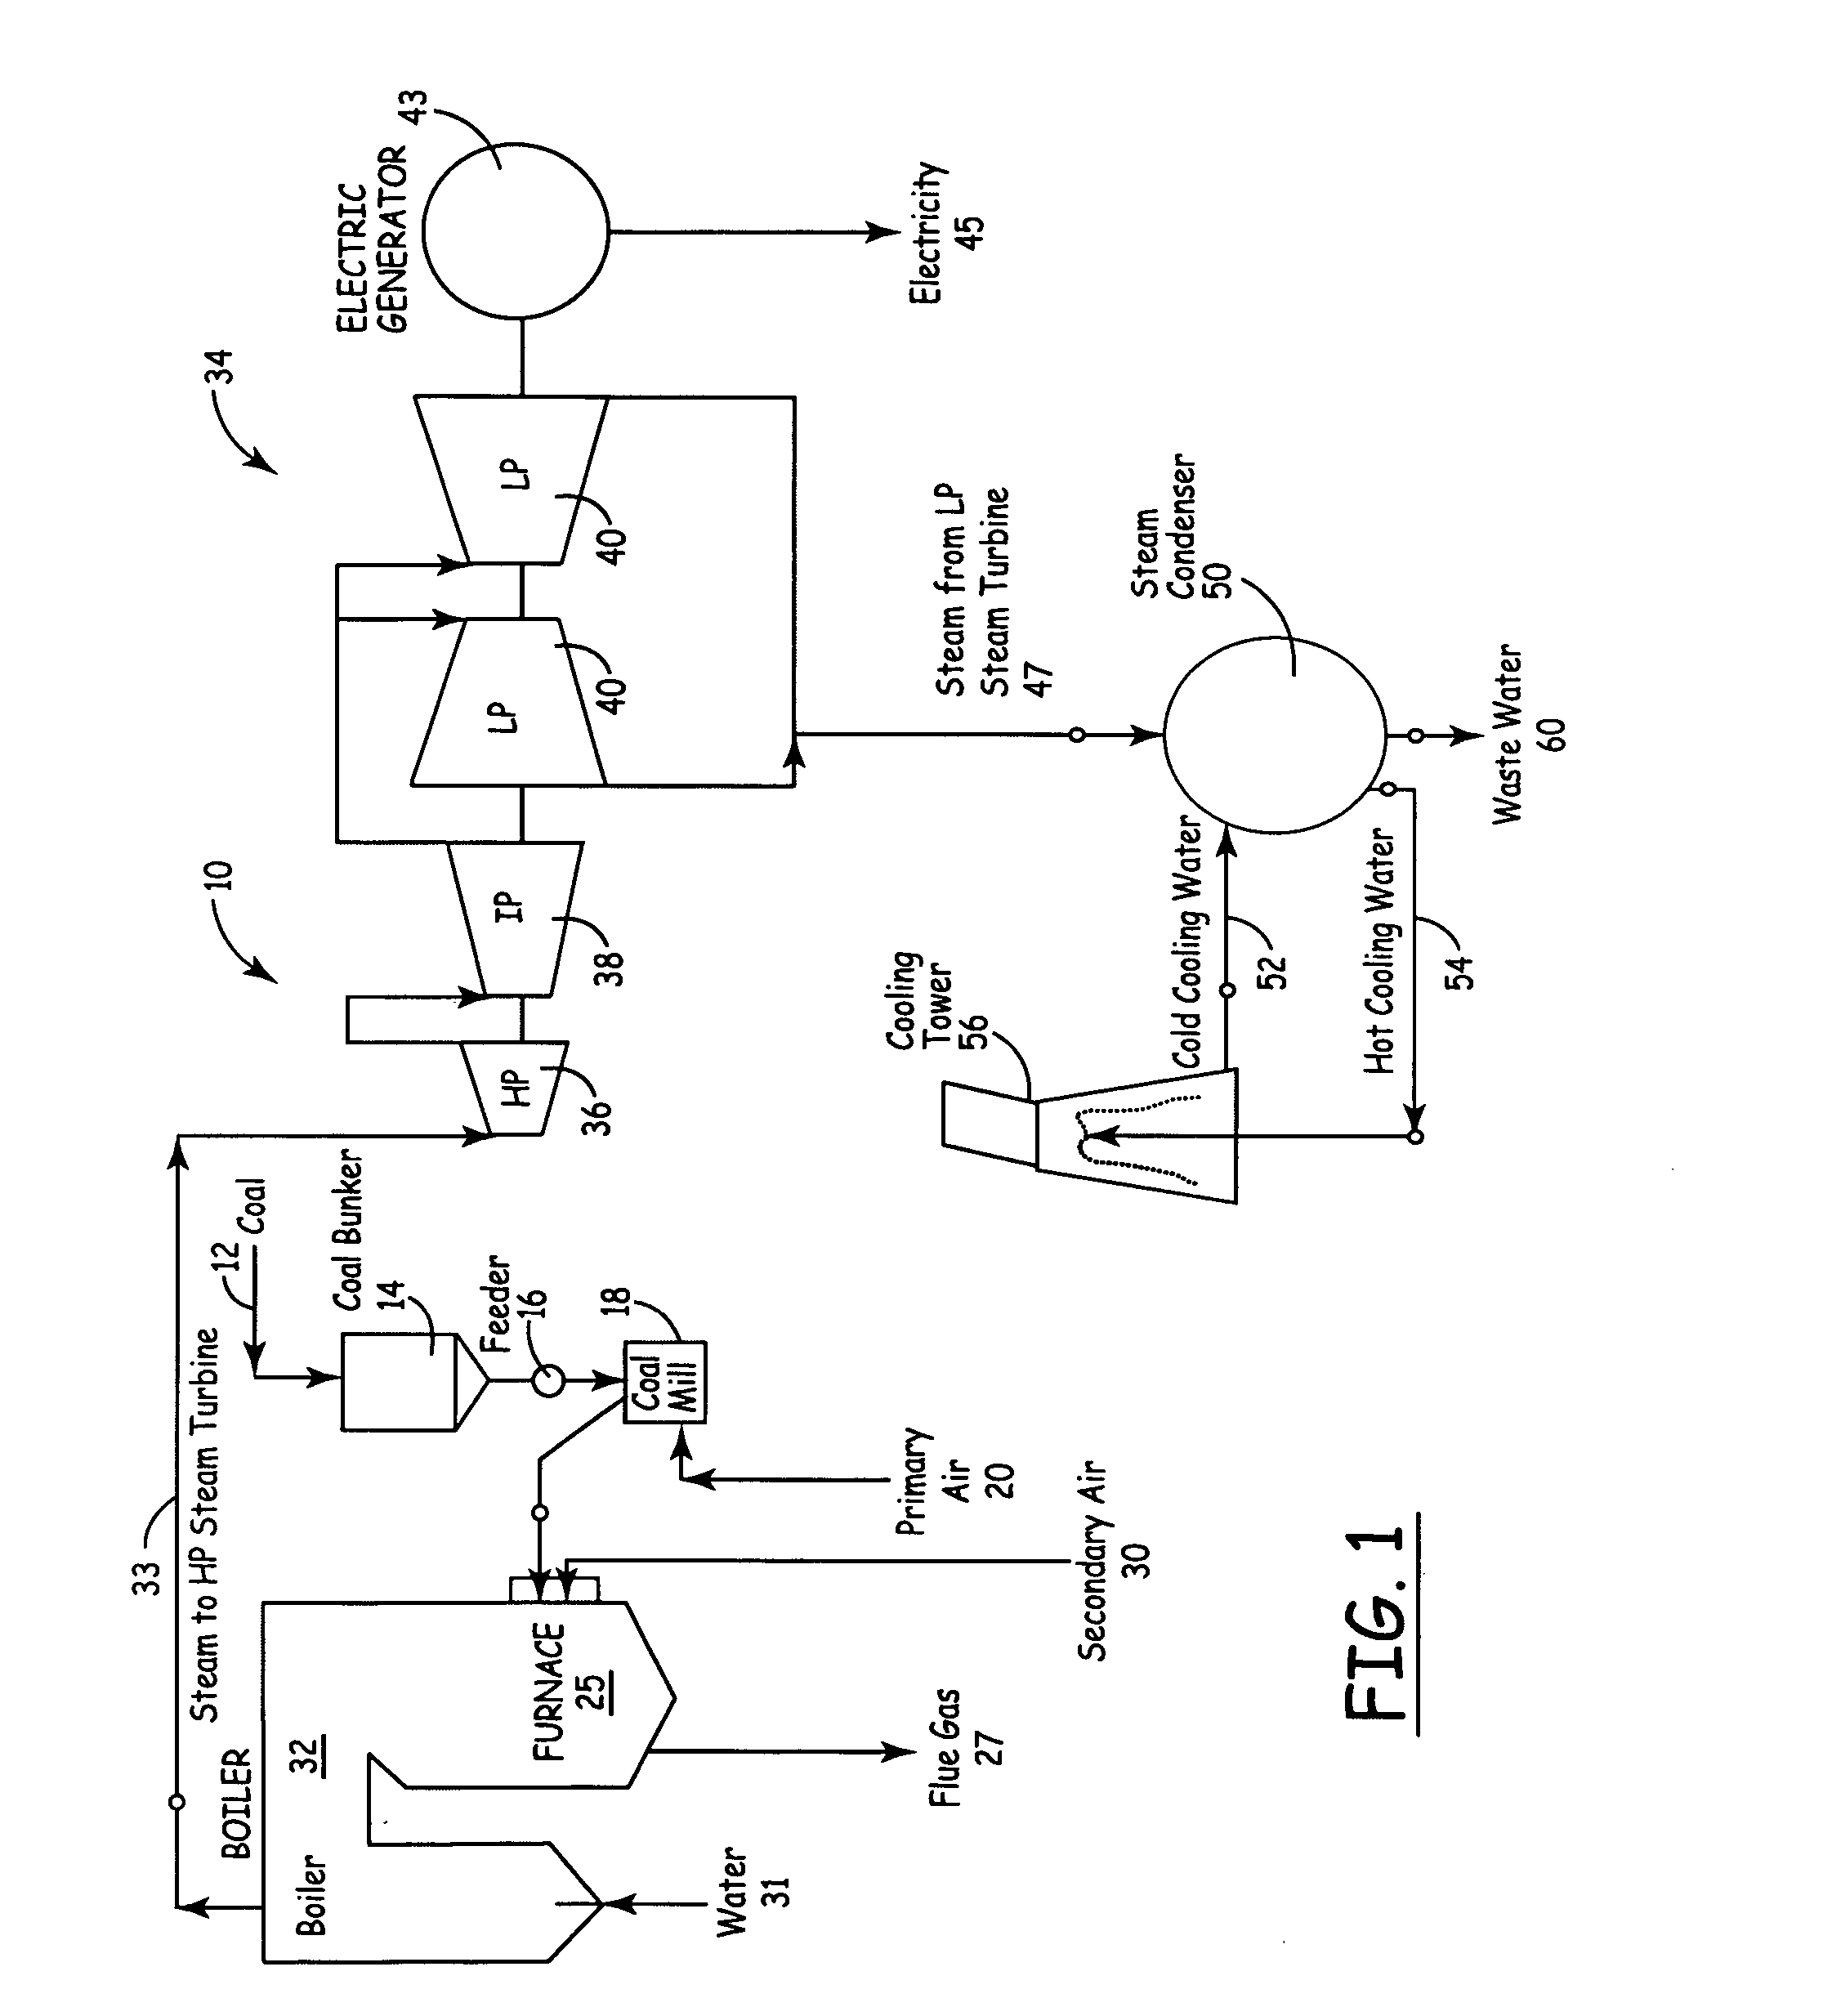 Apparatus for heat treatment of particulate materials